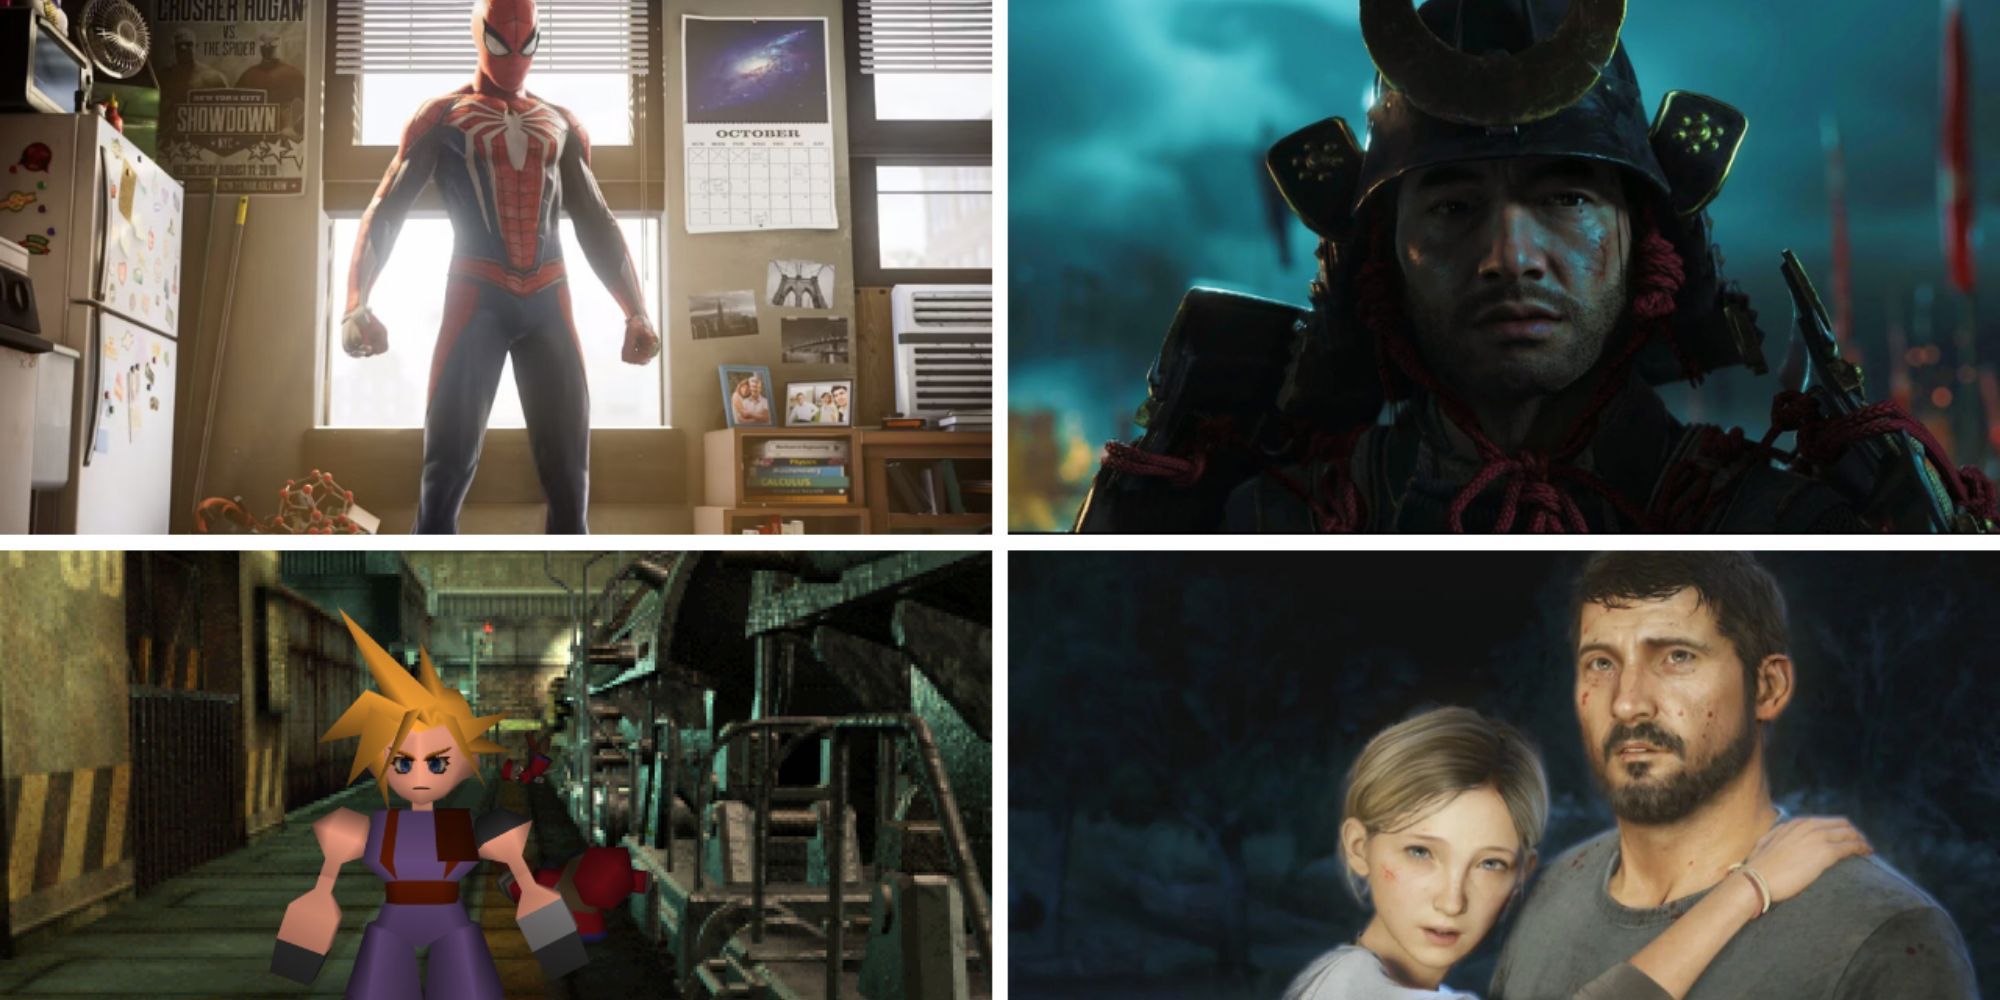 Split image of Spider-Man in front of a window in Marvel's Spider-Man, Jin Sakai wearing samurai armor in  Ghost of Tsushima, Joel carrying Sarah in The Last of Us, and Cloud standing next to a train in Final Fantasy 7